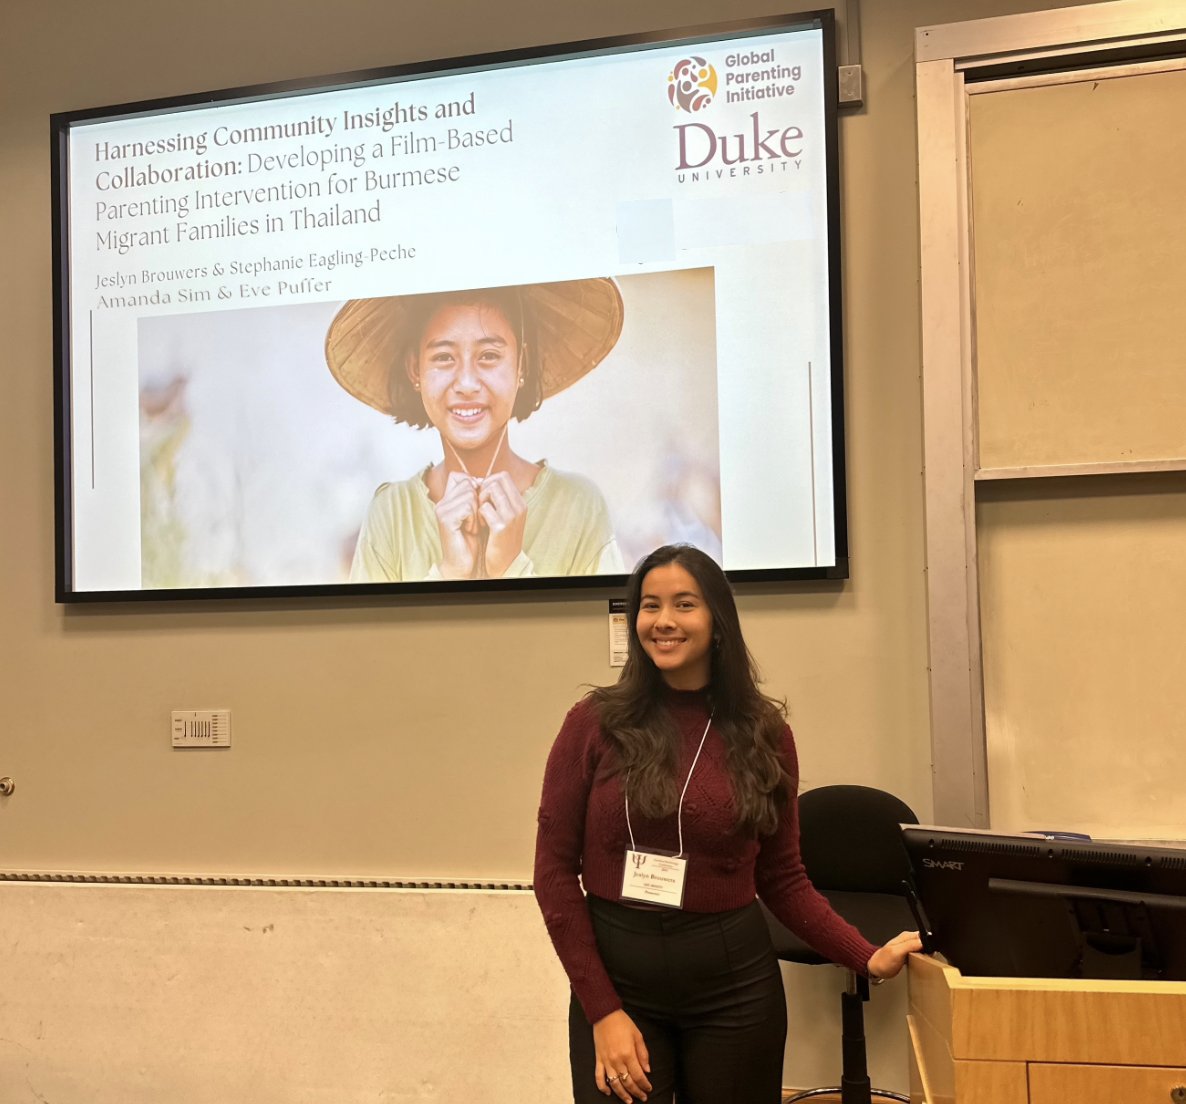 Jeslyn Brouwers presented groundbreaking research at the Carolinas Psychology Conference at @campbelledu. Her study explores a film-based parenting intervention for Burmese migrant families in Thailand, integrating cultural insights. More: bit.ly/3QlxBo3 #Parenting